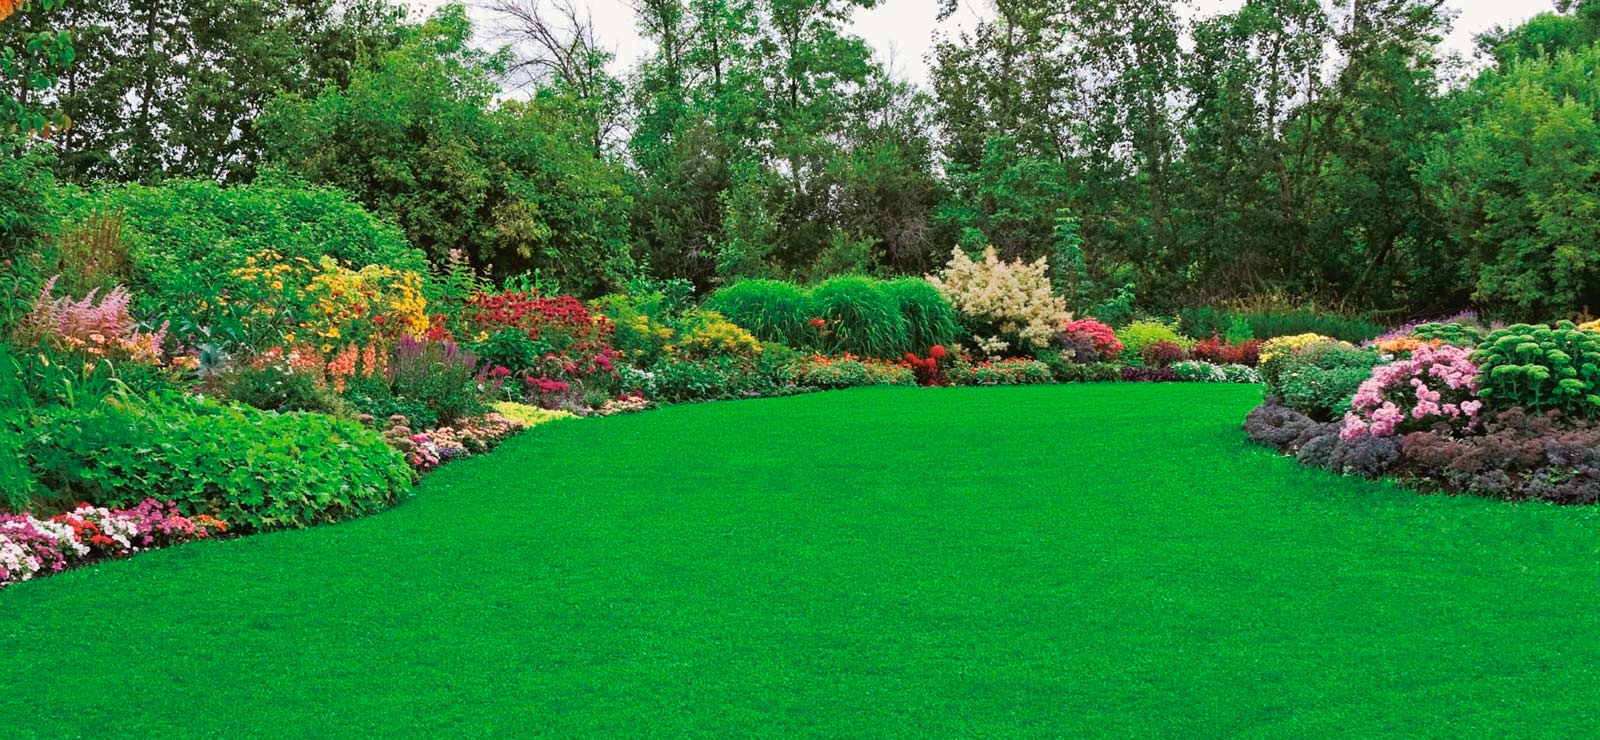 A beautiful lawn with beautiful and vibrant garden